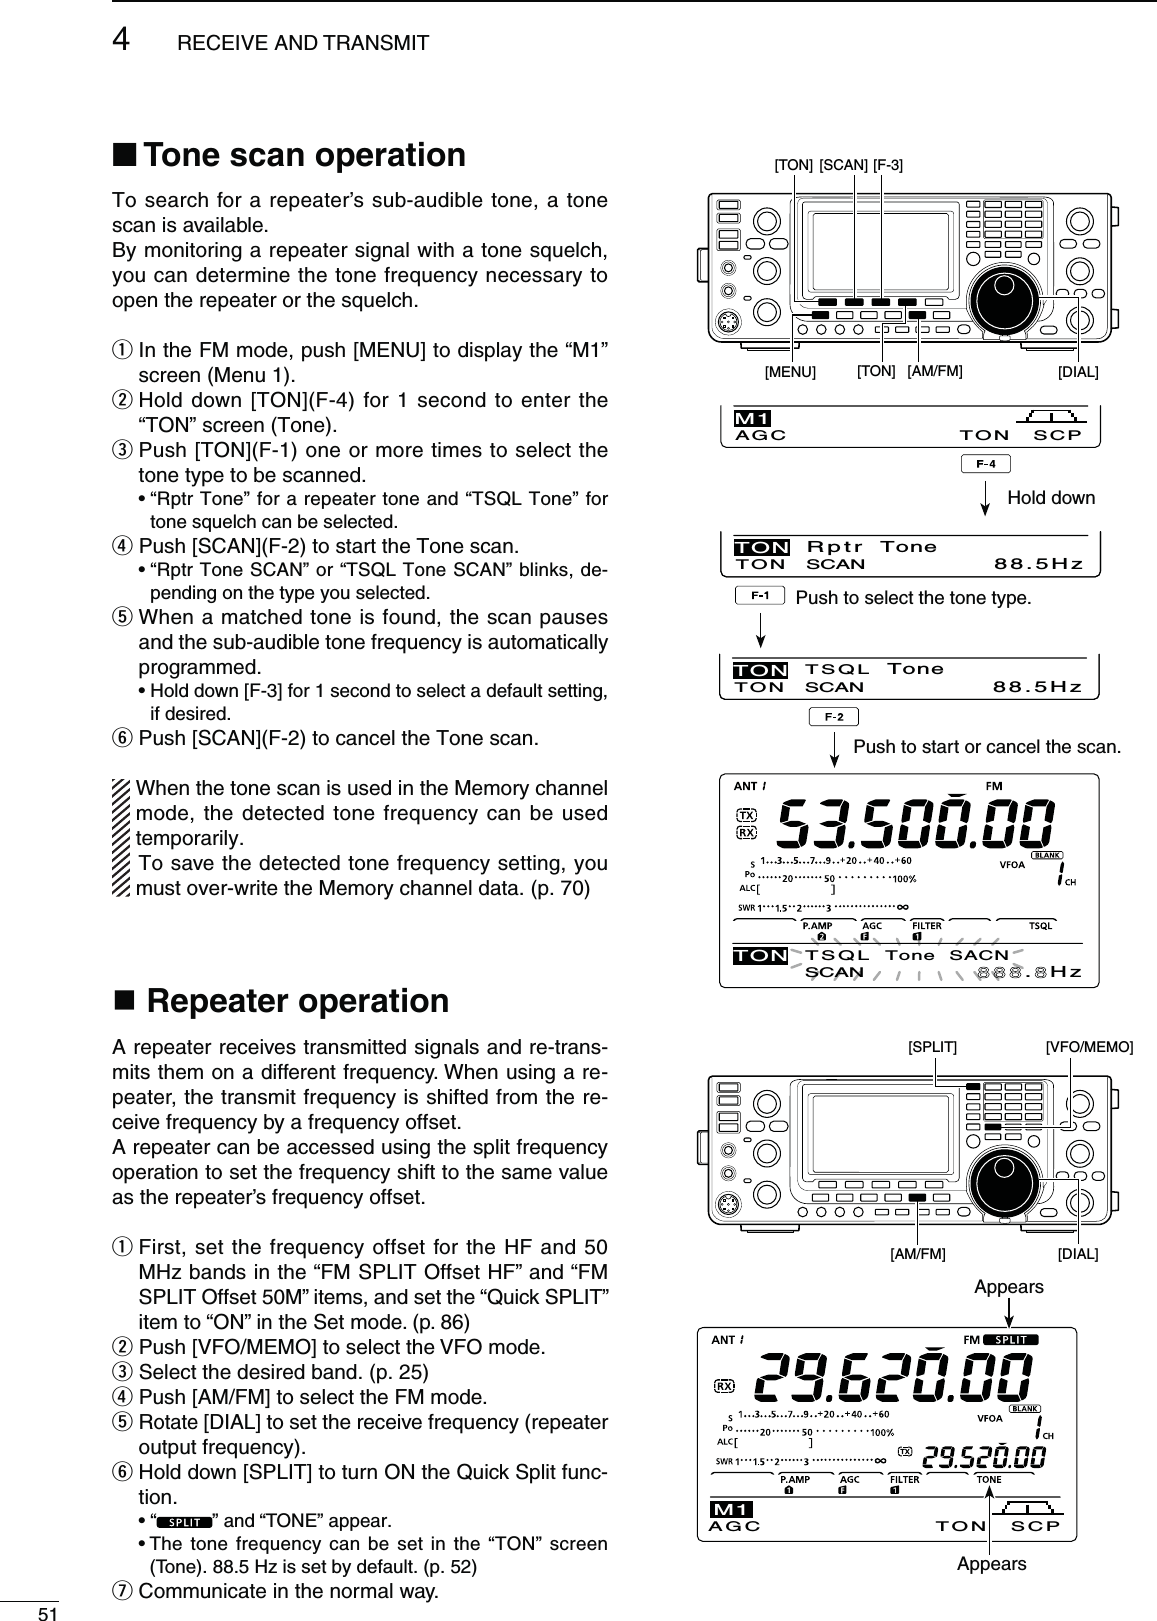 514RECEIVE AND TRANSMITTo search for a repeater’s sub-audible tone, a tone scan is available.By monitoring a repeater signal with a tone squelch, you can determine the tone frequency necessary to open the repeater or the squelch.q  In the FM mode, push [MENU] to display the “M1” screen (Menu 1).w  Hold down [TON](F-4) for 1 second to enter the “TON” screen (Tone).e  Push [TON](F-1) one or more times to select the tone type to be scanned. sh2PTR4ONEvFORAREPEATERTONEANDh431,4ONEvFORtone squelch can be selected.r Push [SCAN](F-2) to start the Tone scan. sh2PTR4ONE3#!.vORh431,4ONE3#!.vBLINKSDE-pending on the type you selected.t  When a matched tone is found, the scan pauses and the sub-audible tone frequency is automatically programmed. s(OLDDOWN;&amp;=FORSECONDTOSELECTADEFAULTSETTINGif desired.y  Push [SCAN](F-2) to cancel the Tone scan. When the tone scan is used in the Memory channel mode, the detected tone frequency can be used temporarily. To save the detected tone frequency setting, you must over-write the Memory channel data. (p. 70)N4ONESCANOPERATION Repeater operationA repeater receives transmitted signals and re-trans-mits them on a different frequency. When using a re-peater, the transmit frequency is shifted from the re-ceive frequency by a frequency offset.A repeater can be accessed using the split frequency operation to set the frequency shift to the same value as the repeater’s frequency offset.q  First, set the frequency offset for the HF and 50 MHz bands in the “FM SPLIT Offset HF” and “FM SPLIT Offset 50M” items, and set the “Quick SPLIT” item to “ON” in the Set mode. (p. 86)w Push [VFO/MEMO] to select the VFO mode.e Select the desired band. (p. 25)r Push [AM/FM] to select the FM mode.t  Rotate [DIAL] to set the receive frequency (repeater output frequency).y  Hold down [SPLIT] to turn ON the Quick Split func-tion. sh ” and “TONE” appear.s4HETONEFREQUENCYCANBESETINTHEh4/.vSCREEN(Tone). 88.5 Hz is set by default. (p. 52)u  Communicate in the normal way.[TON] [SCAN] [F-3][MENU] [AM/FM][TON] [DIAL]AGC TON SCPM188.5HzTO N SCANTON Rptr  Tone.HzSCANTSQL  Tone  SACNTON88.5HzTO N SCANTON TSQL  ToneHold downPush to select the tone type.Push to start or cancel the scan.[DIAL][VFO/MEMO] [SPLIT] [AM/FM]AGC TON SCPM1AppearsAppears